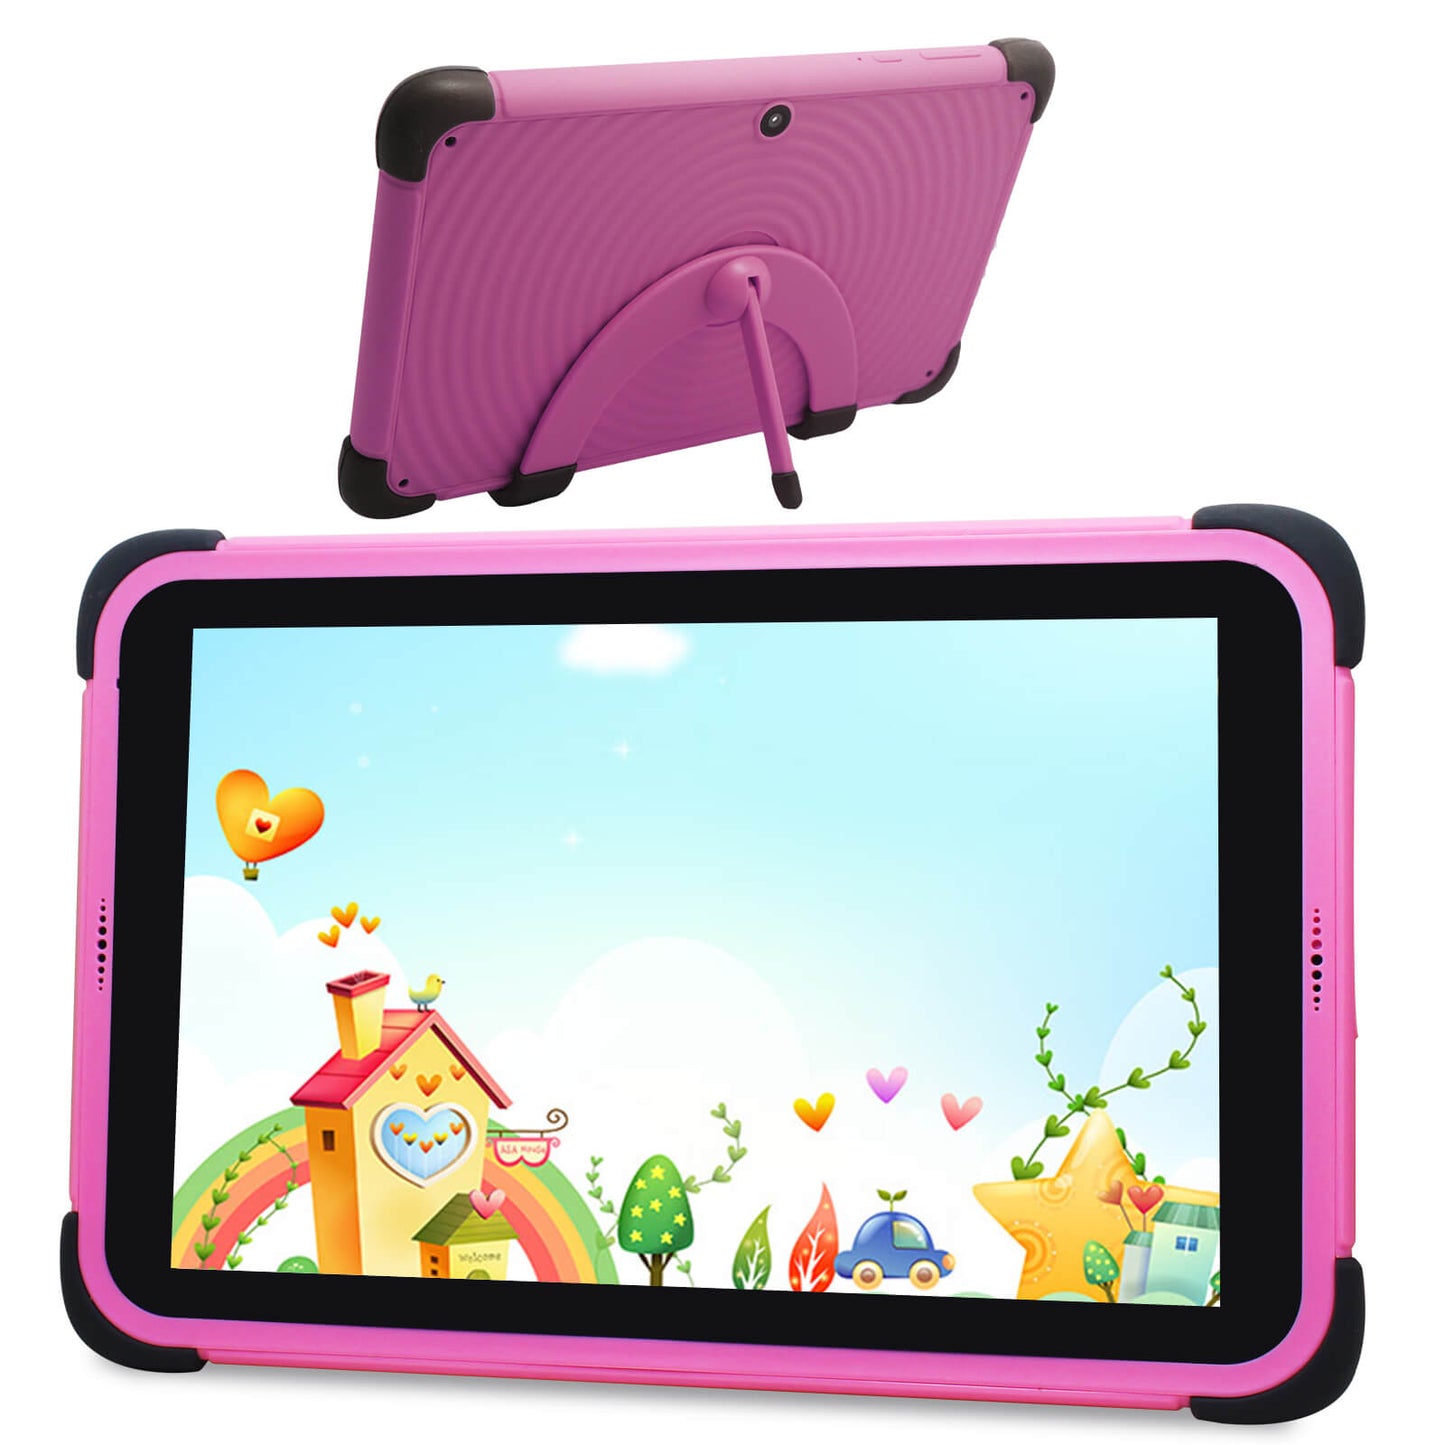 MQ 8010 Android Kids Tablet